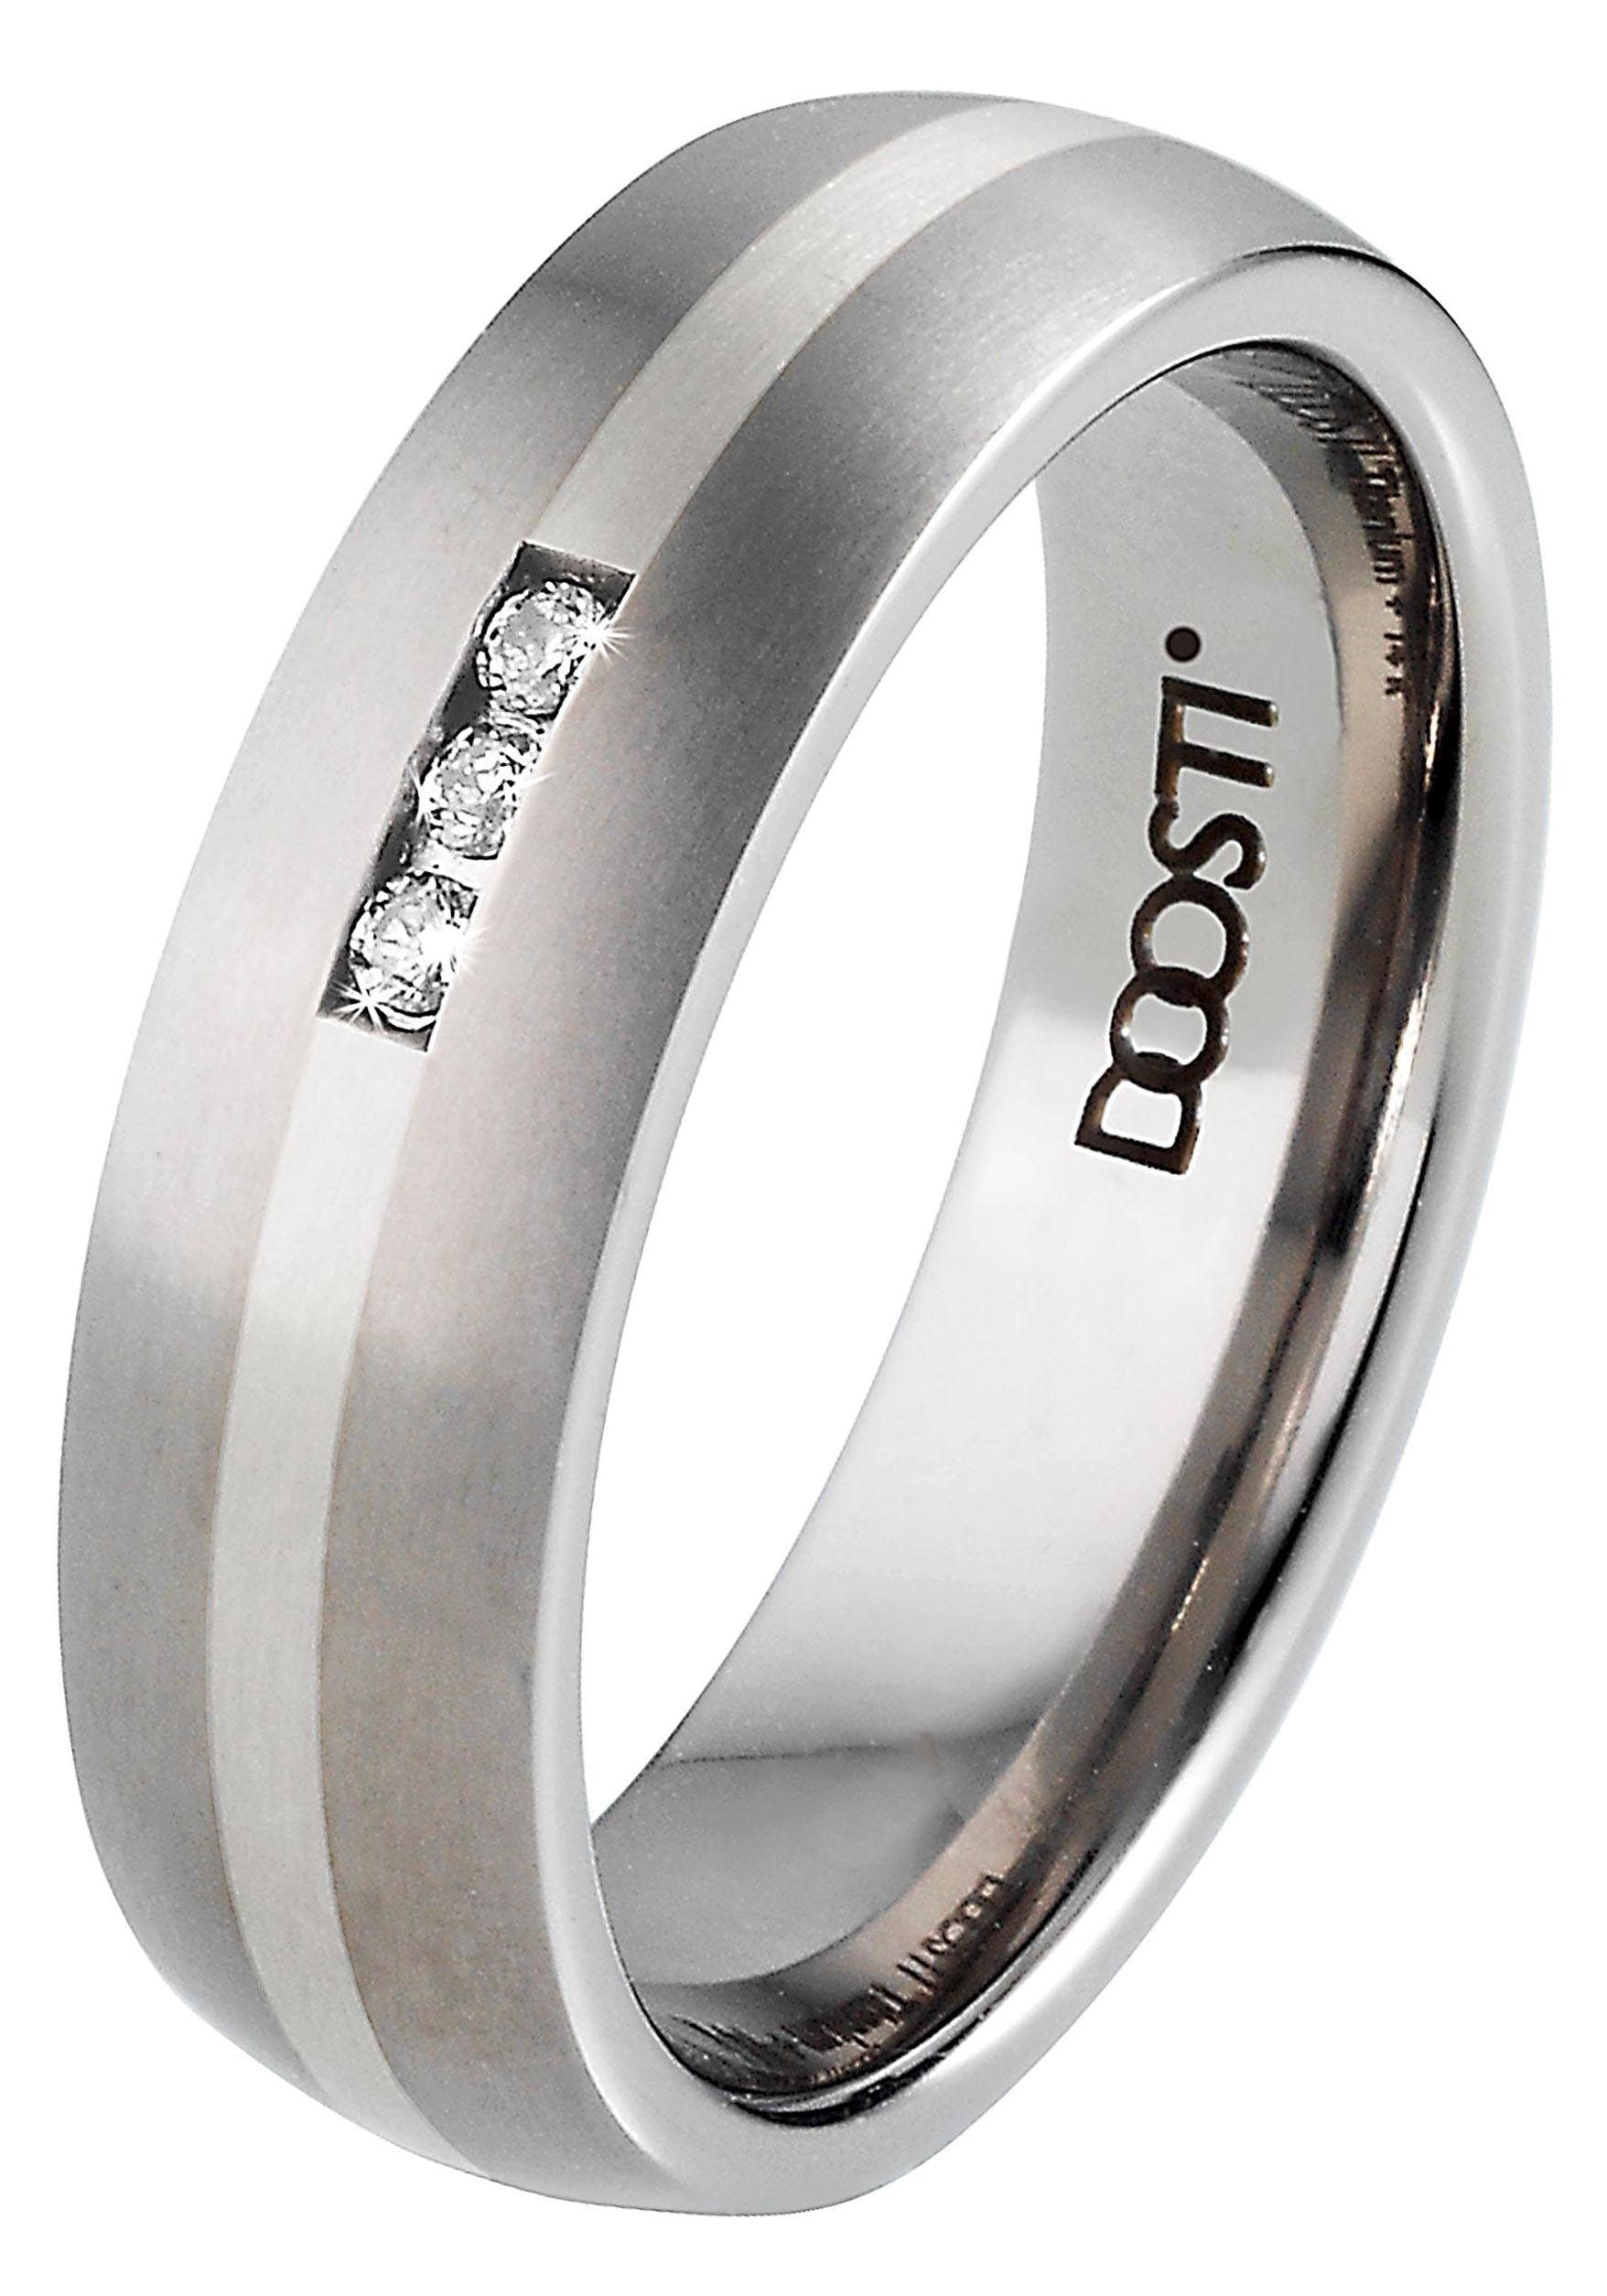 DOOSTI Trauring »TS-01-D, wahlweise ohne - SILVER oder kaufen TS-01-H, Germany bequem LINE«, in Zirkonia mit Made